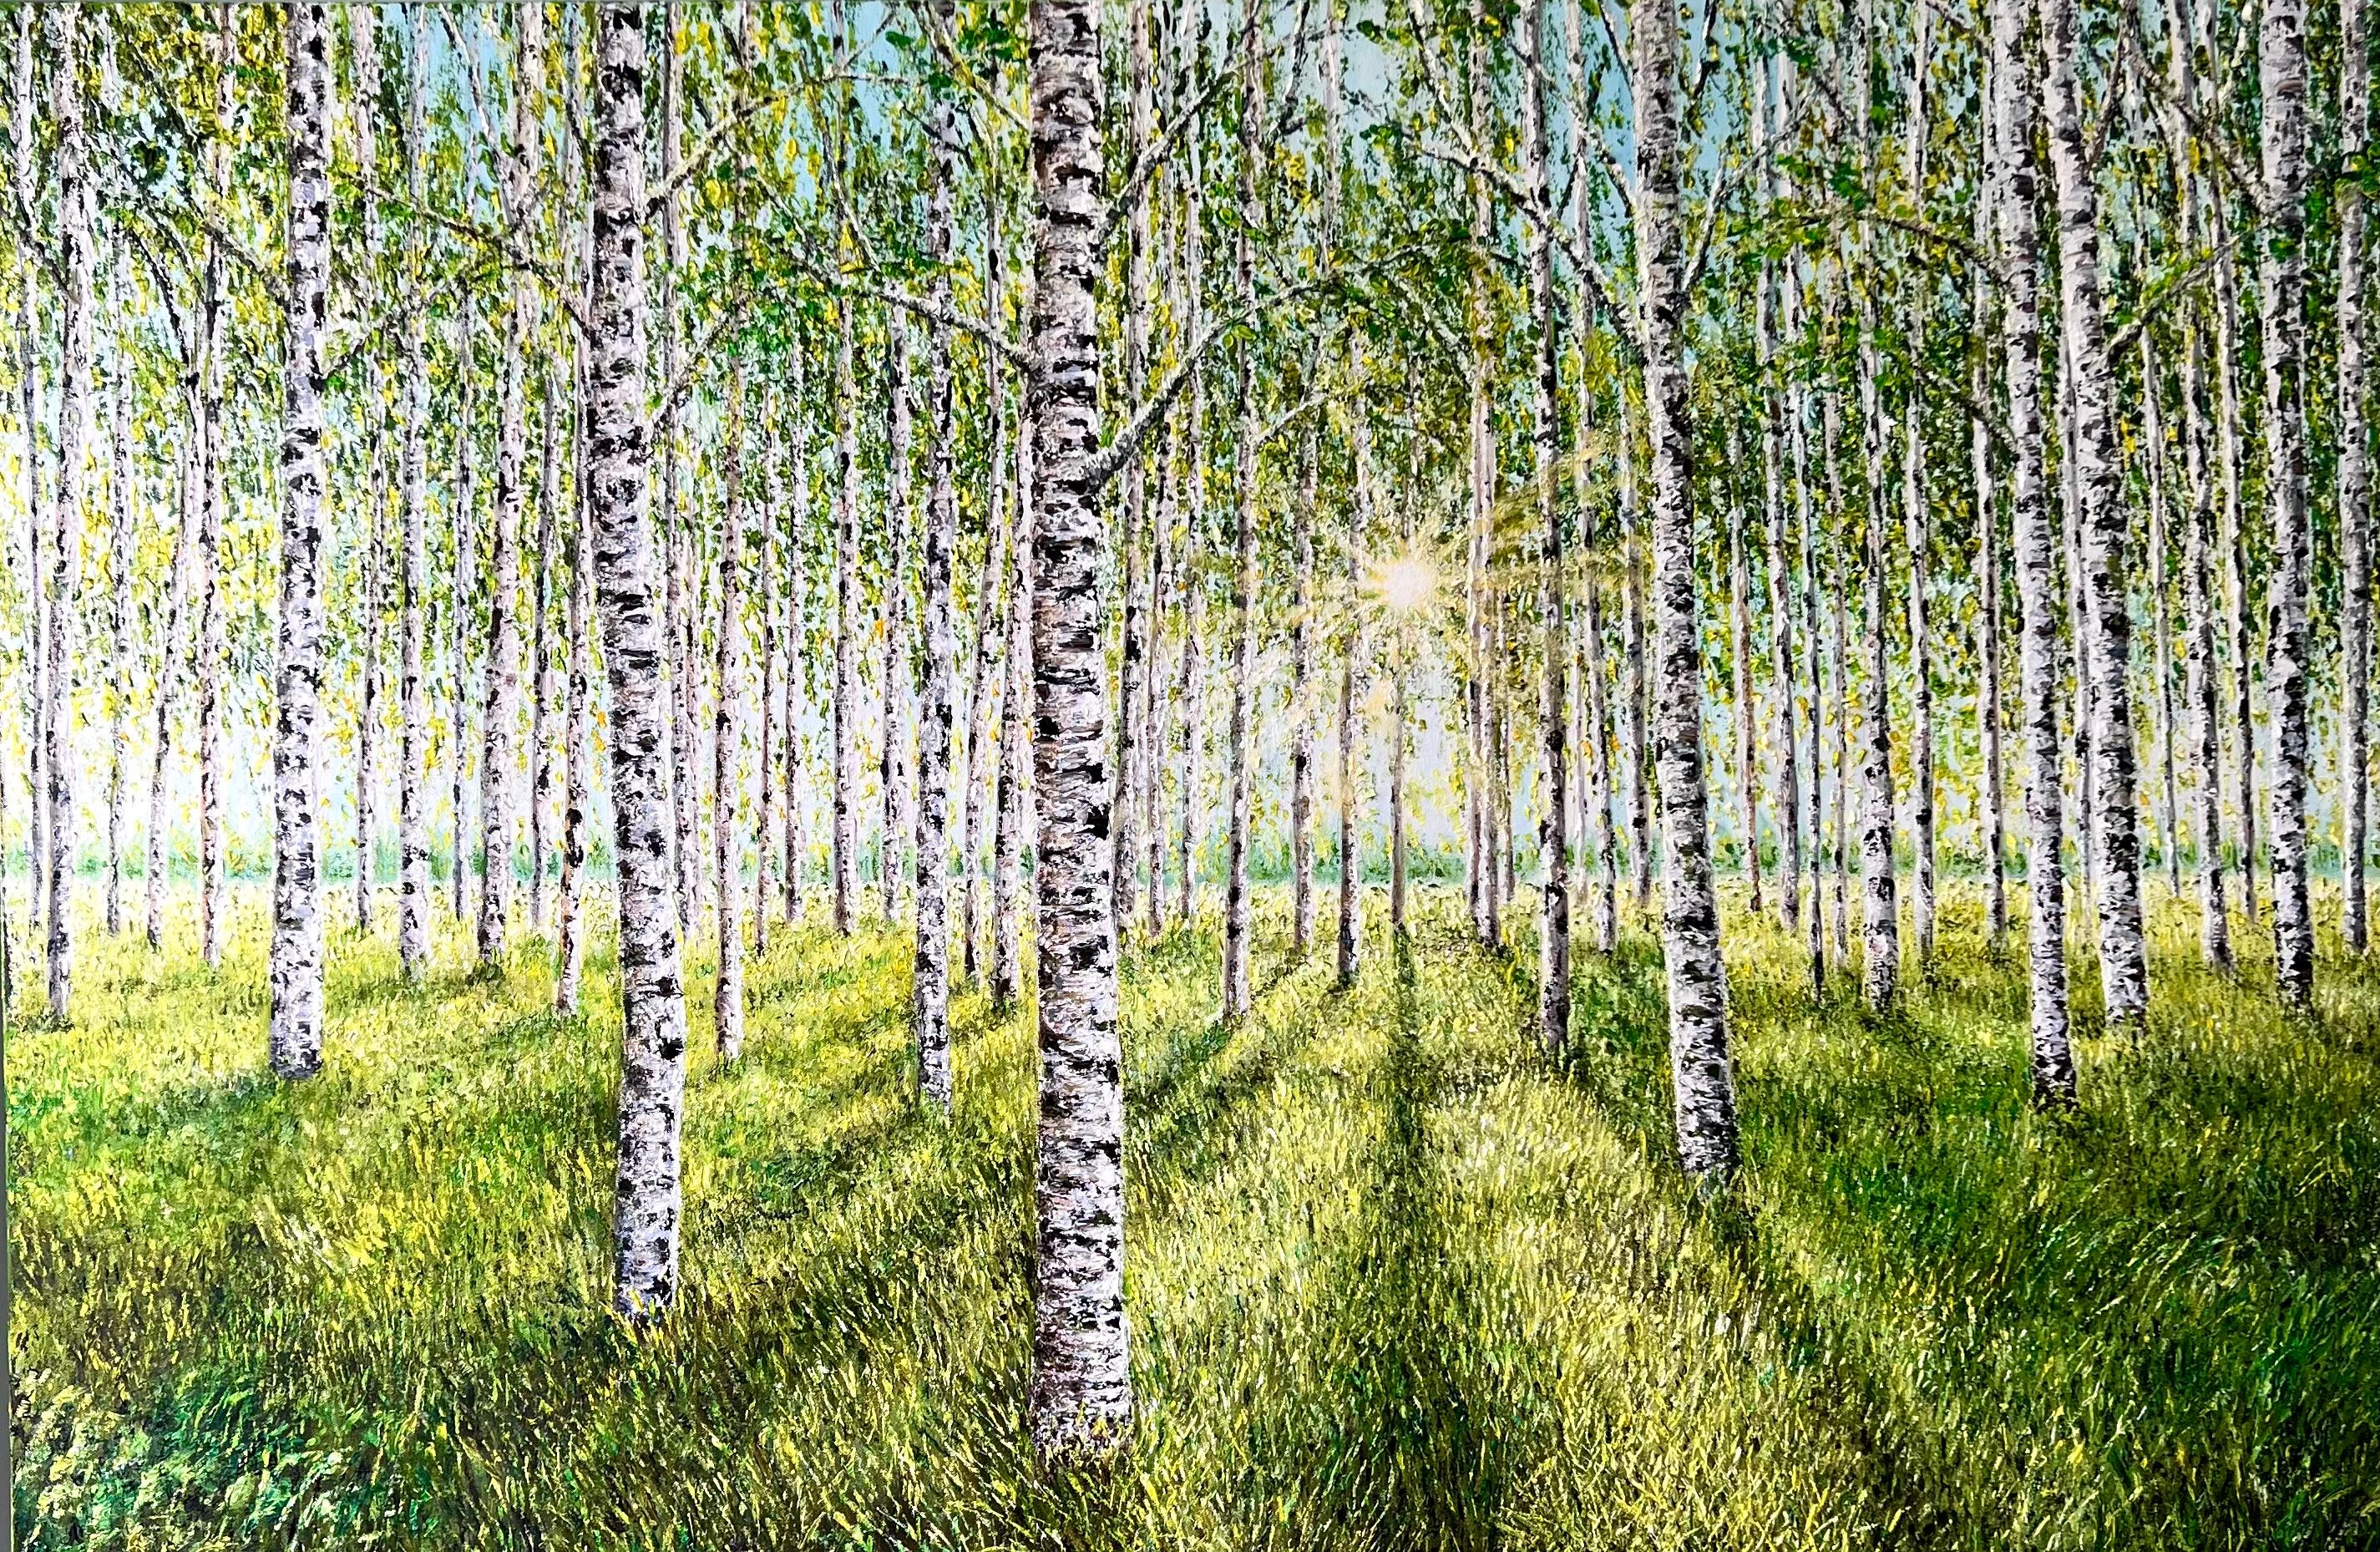 New Beginnings-original realism landscape forest oil painting-contemporary Art - Painting by Sophia Chalklen